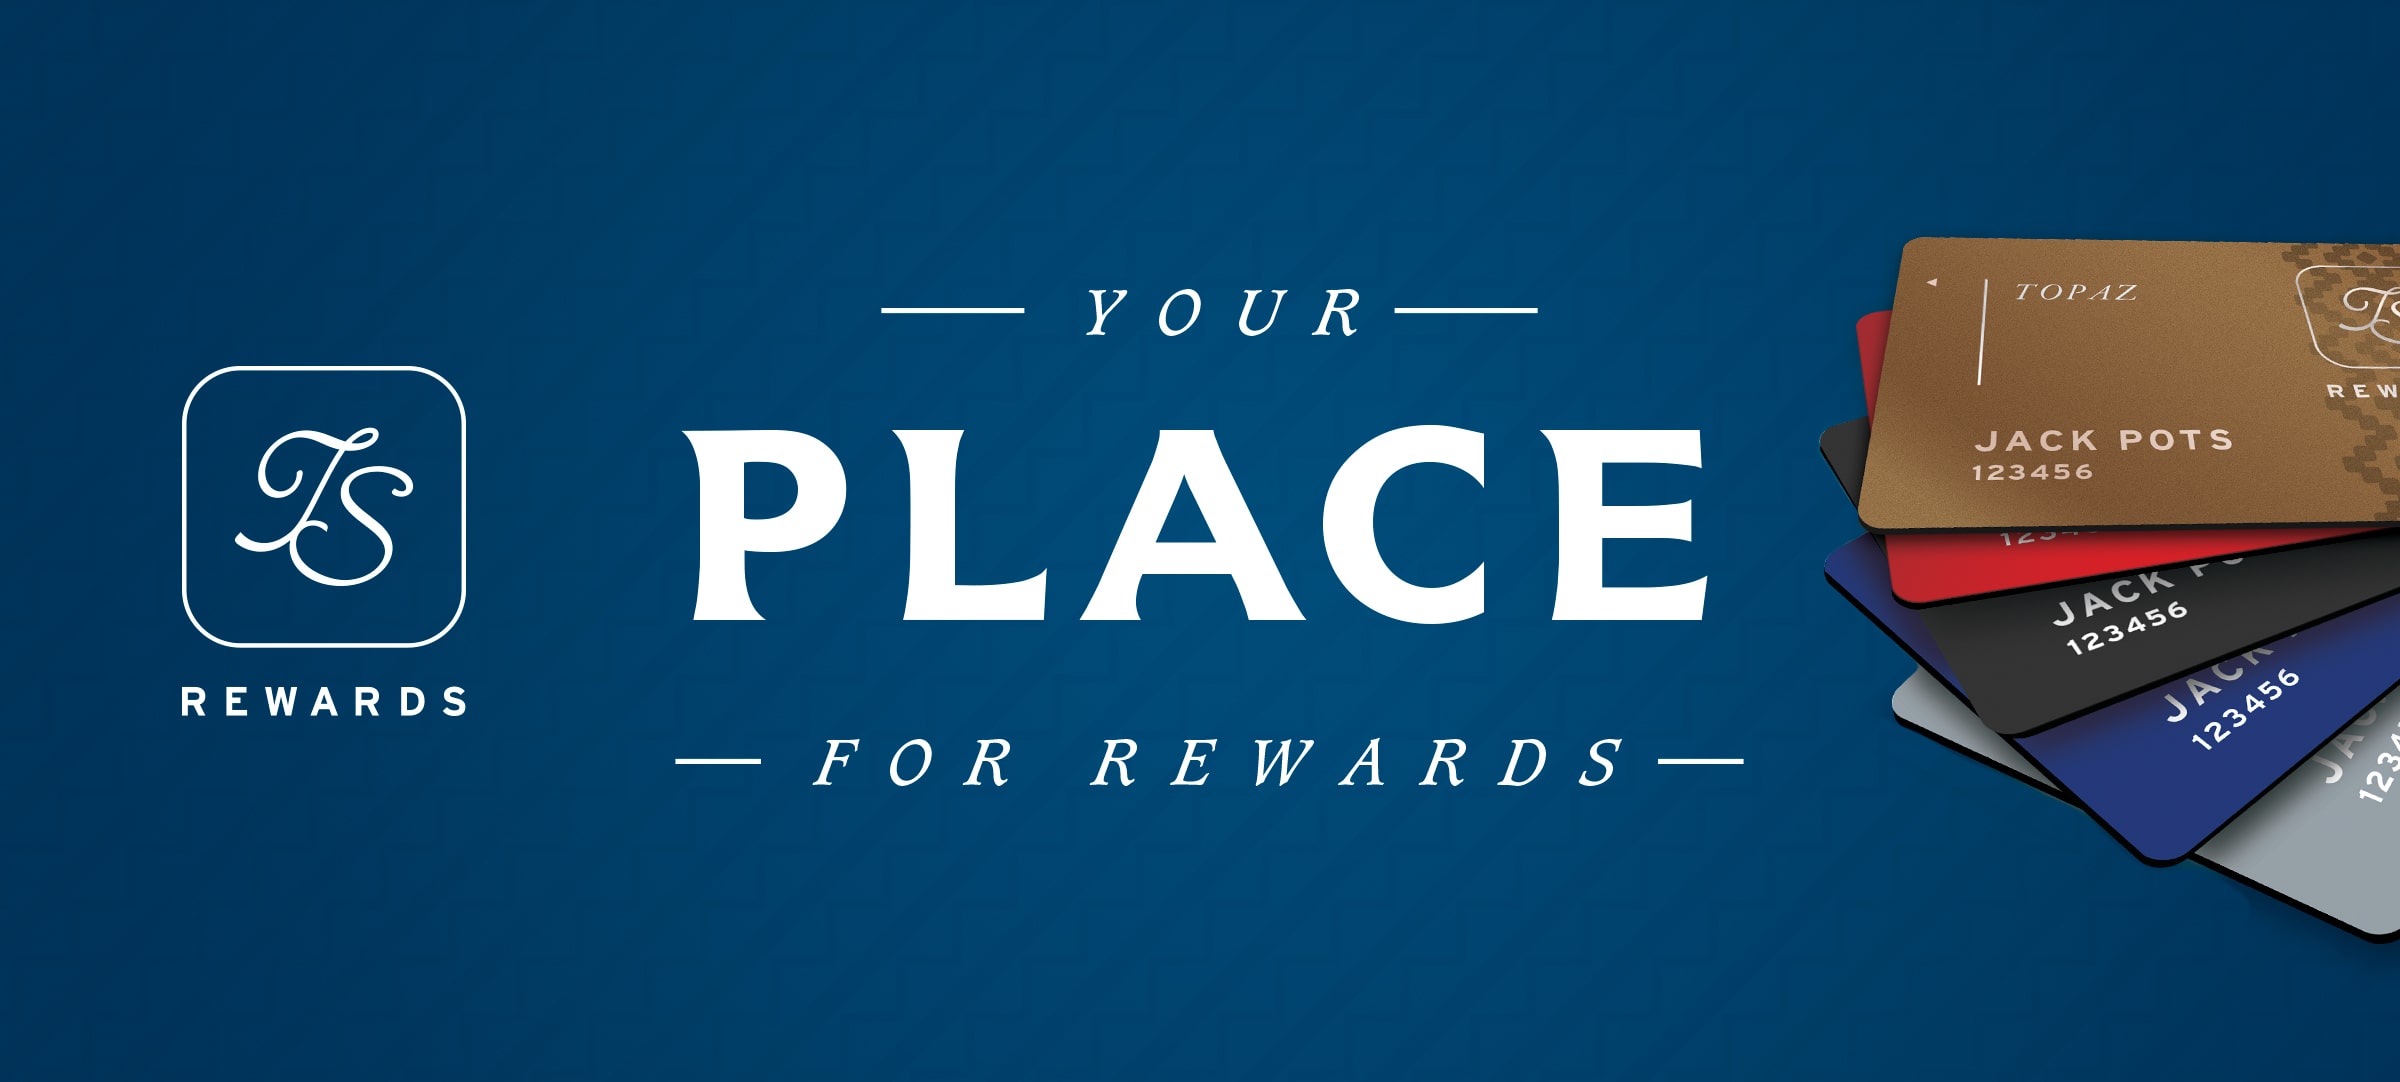 TS Rewards card at Point Place Casino 'Your Place for Rewards'